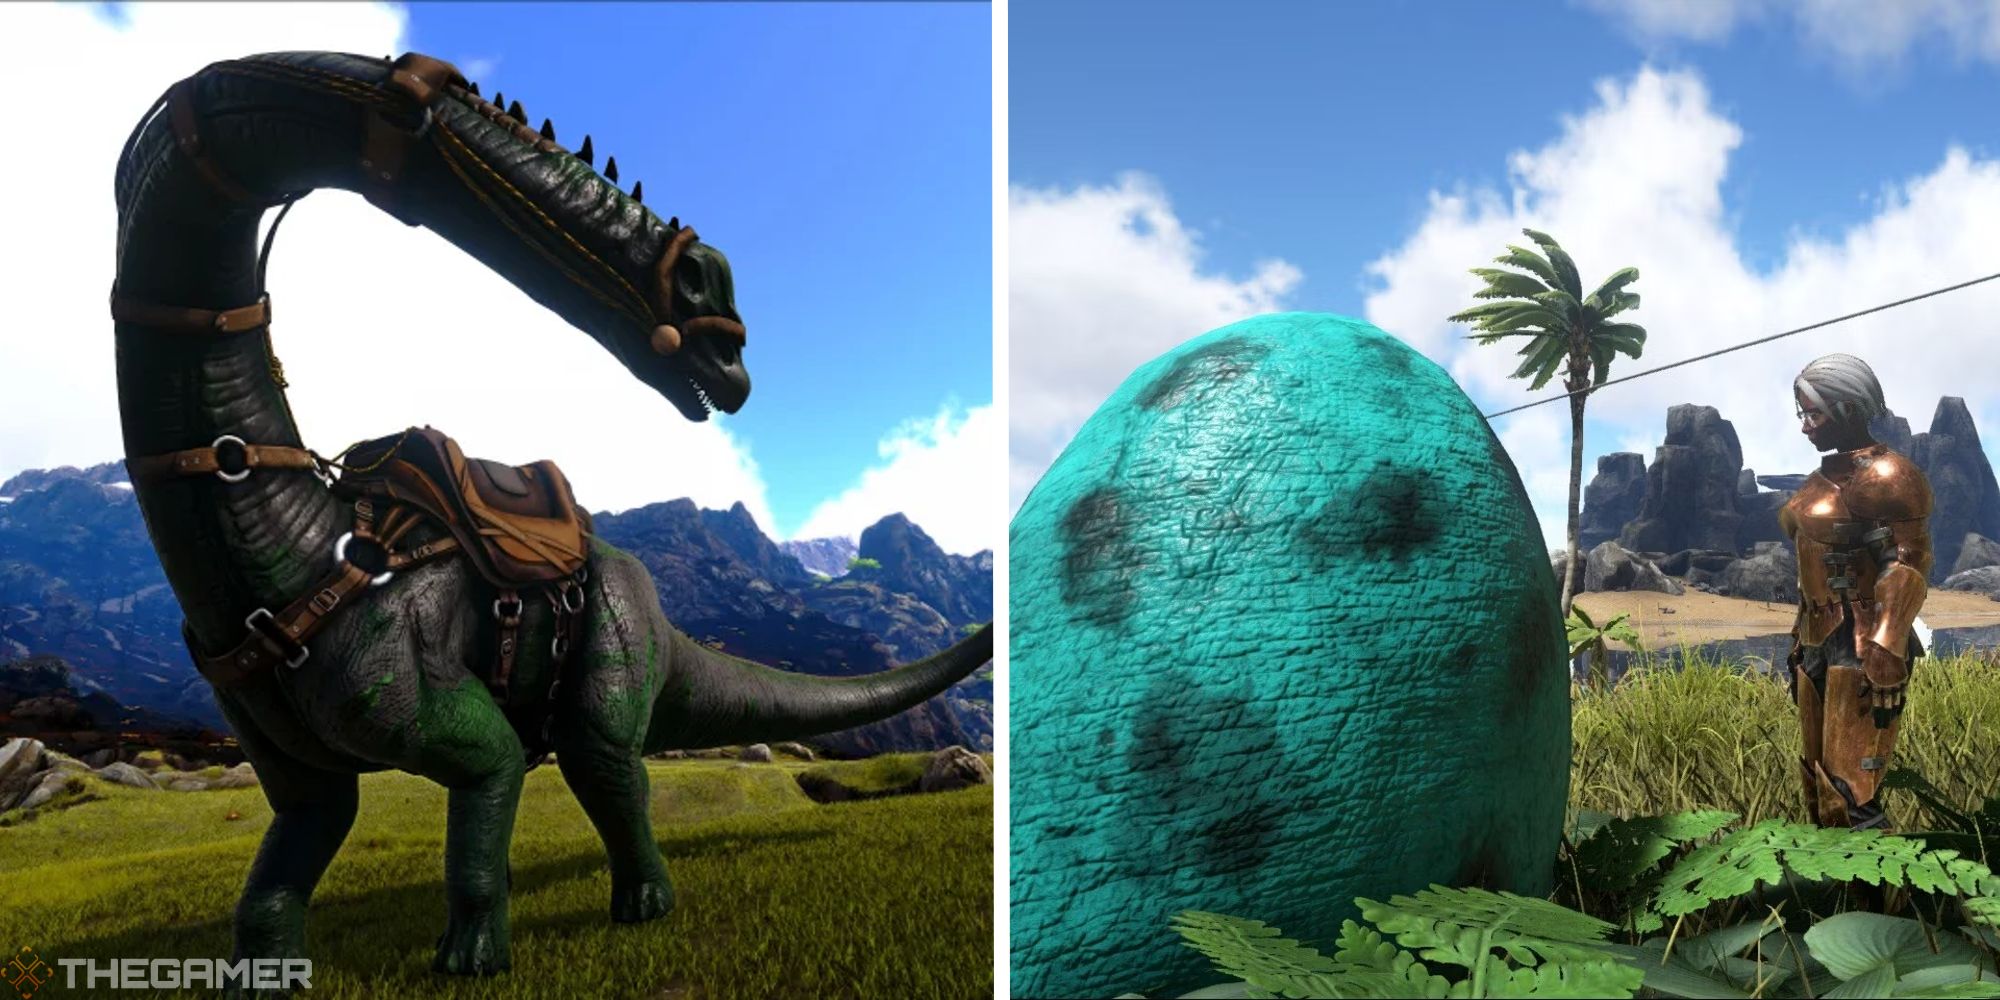 image of bronto next to image of bronto egg and human for scale